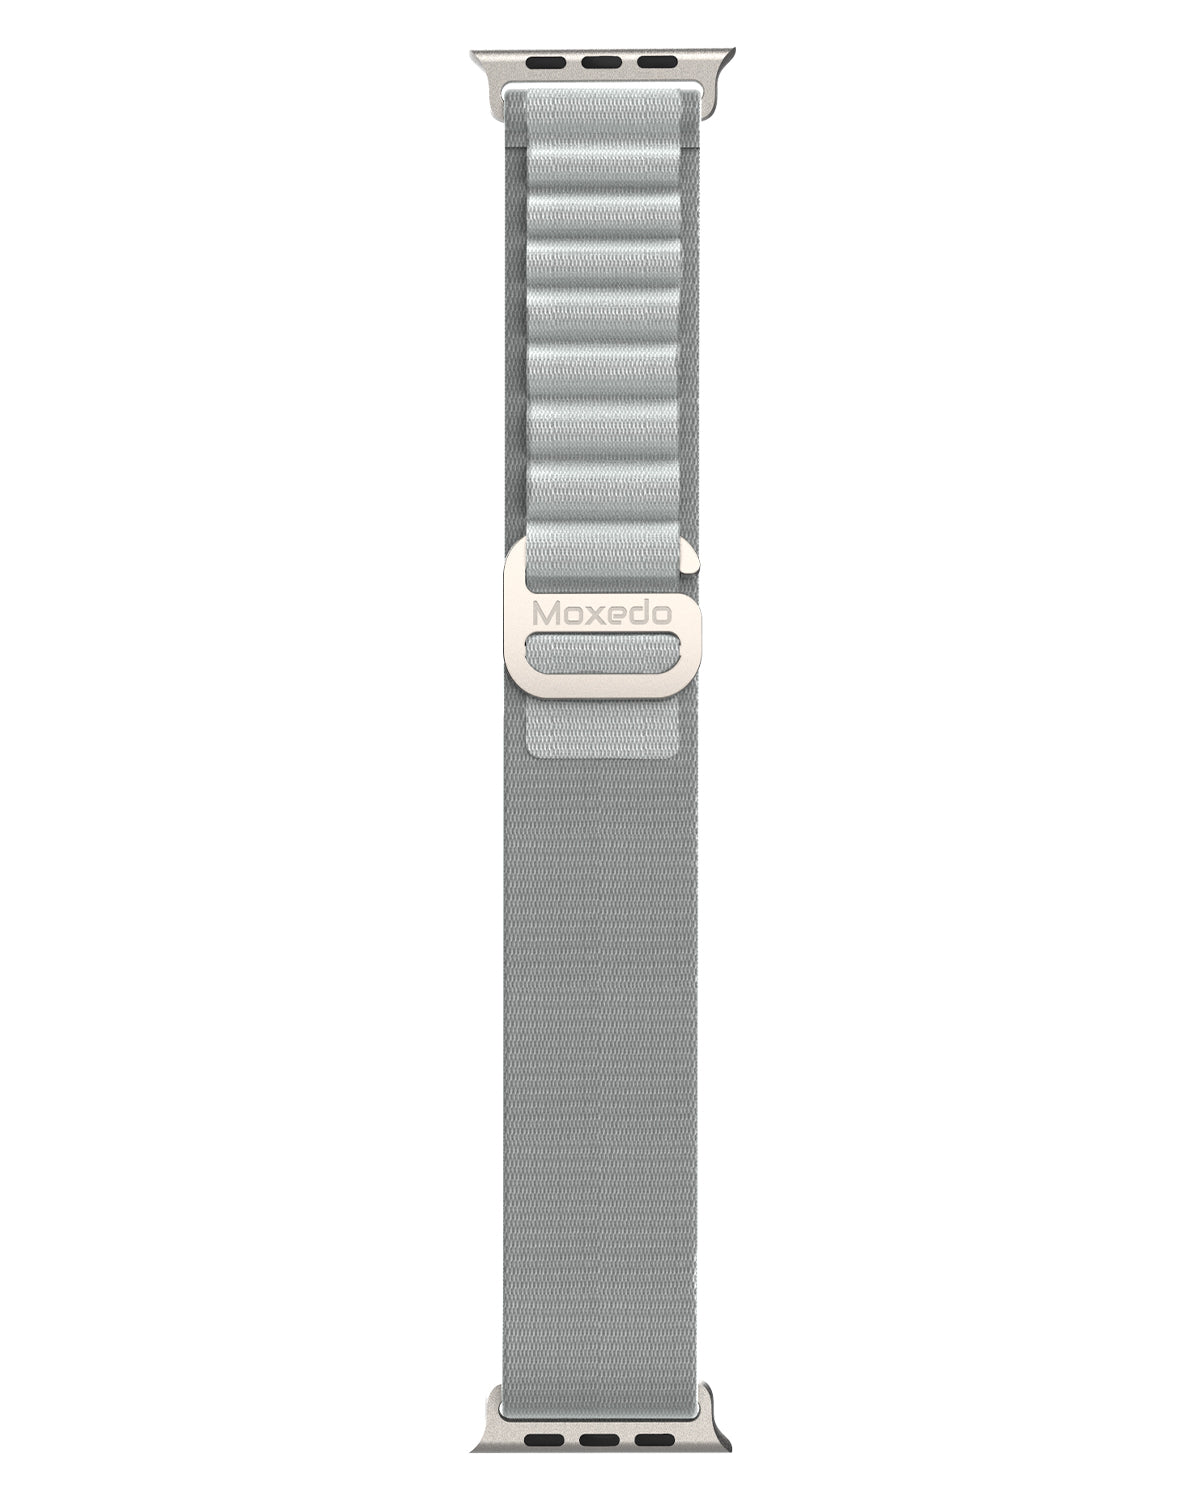 Moxedo Alpine Loop Watch Band Adjustable Sports Nylon Woven with Titanium G-Hook Strap design for 44mm,45mm,49mm (Light Grey)